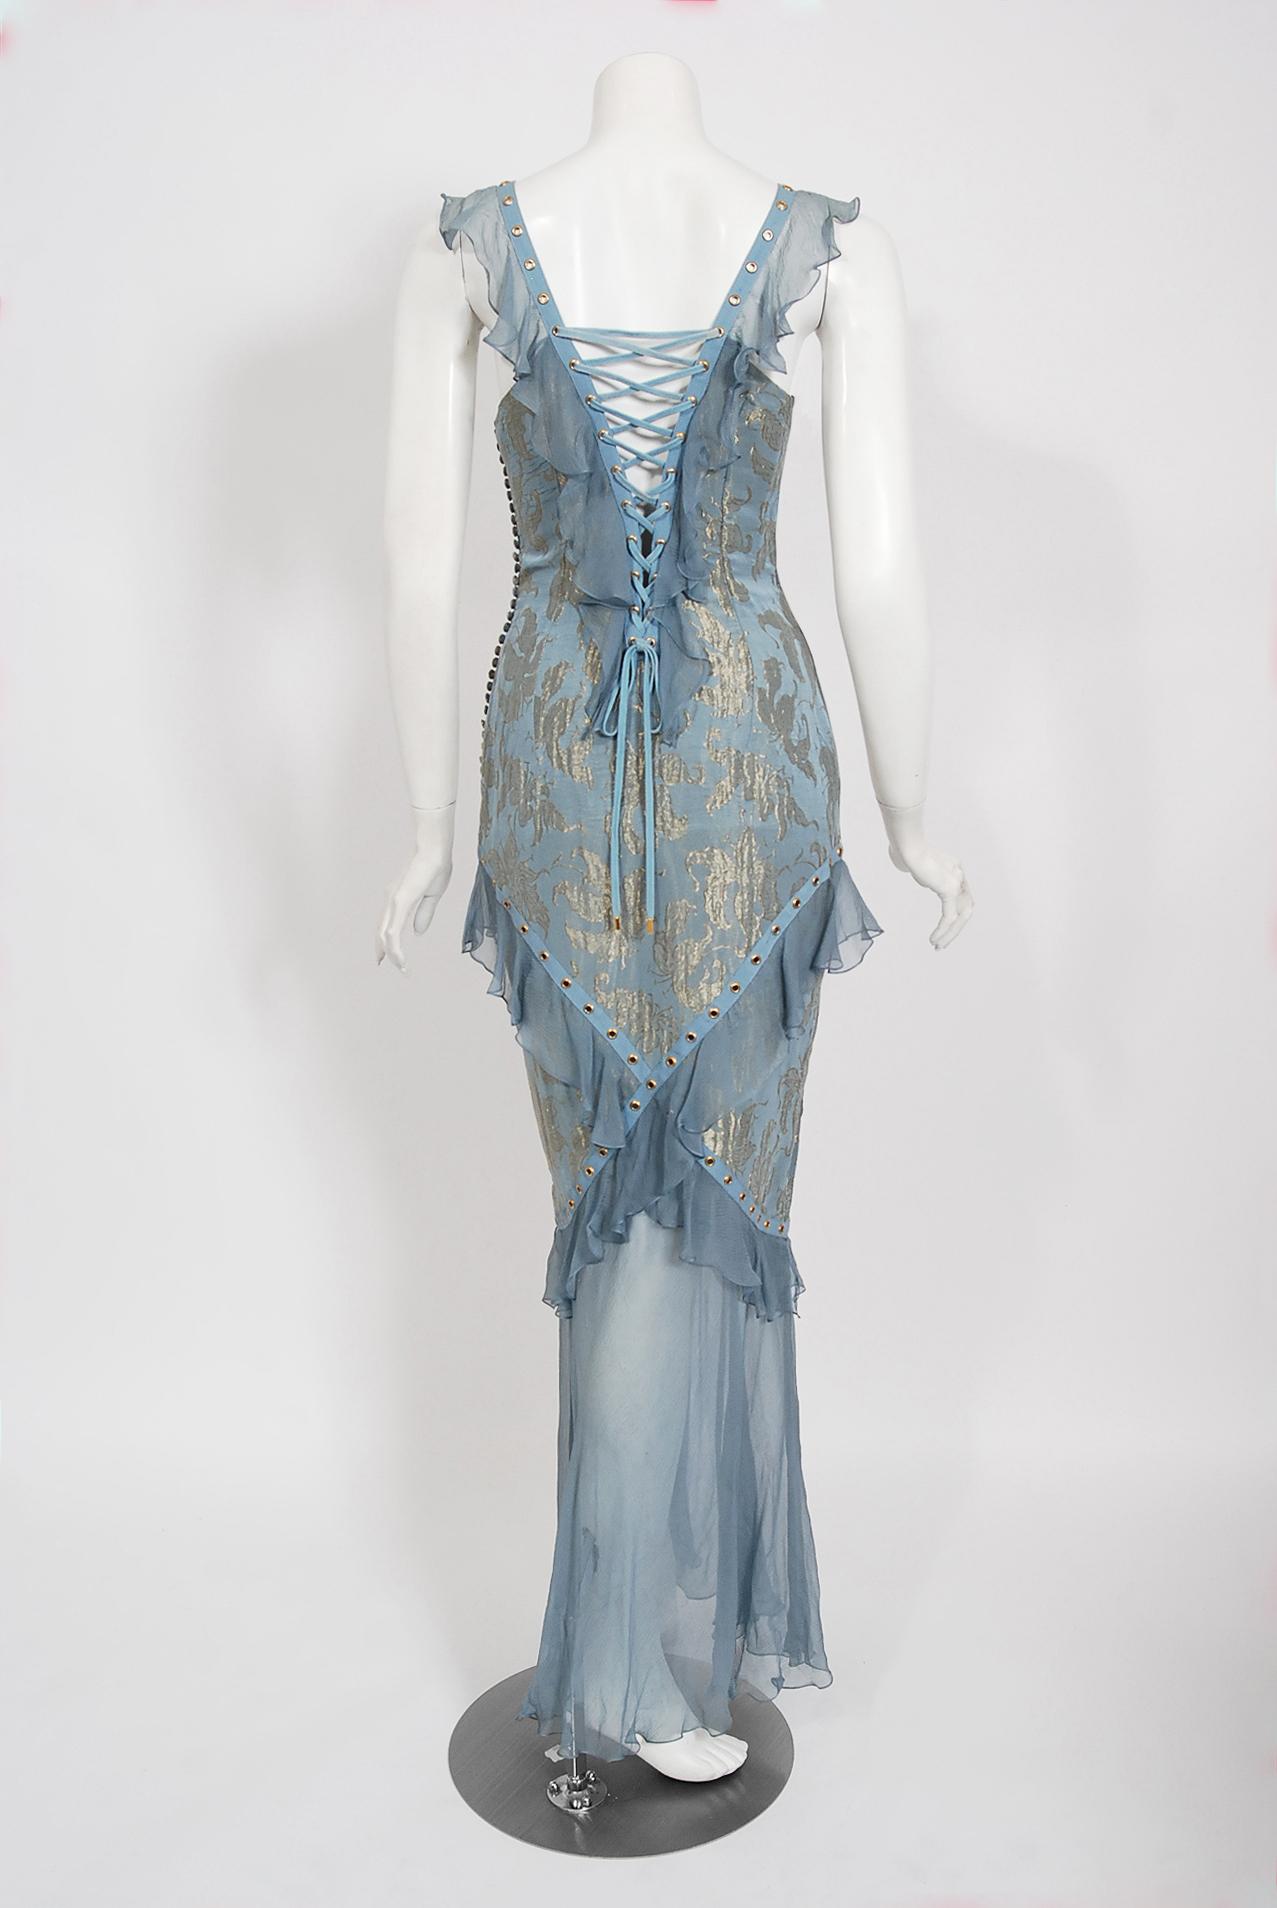 Vintage 2003 Christian Dior by Galliano Metallic Blue Silk Lace-Up Bias Cut Gown 1